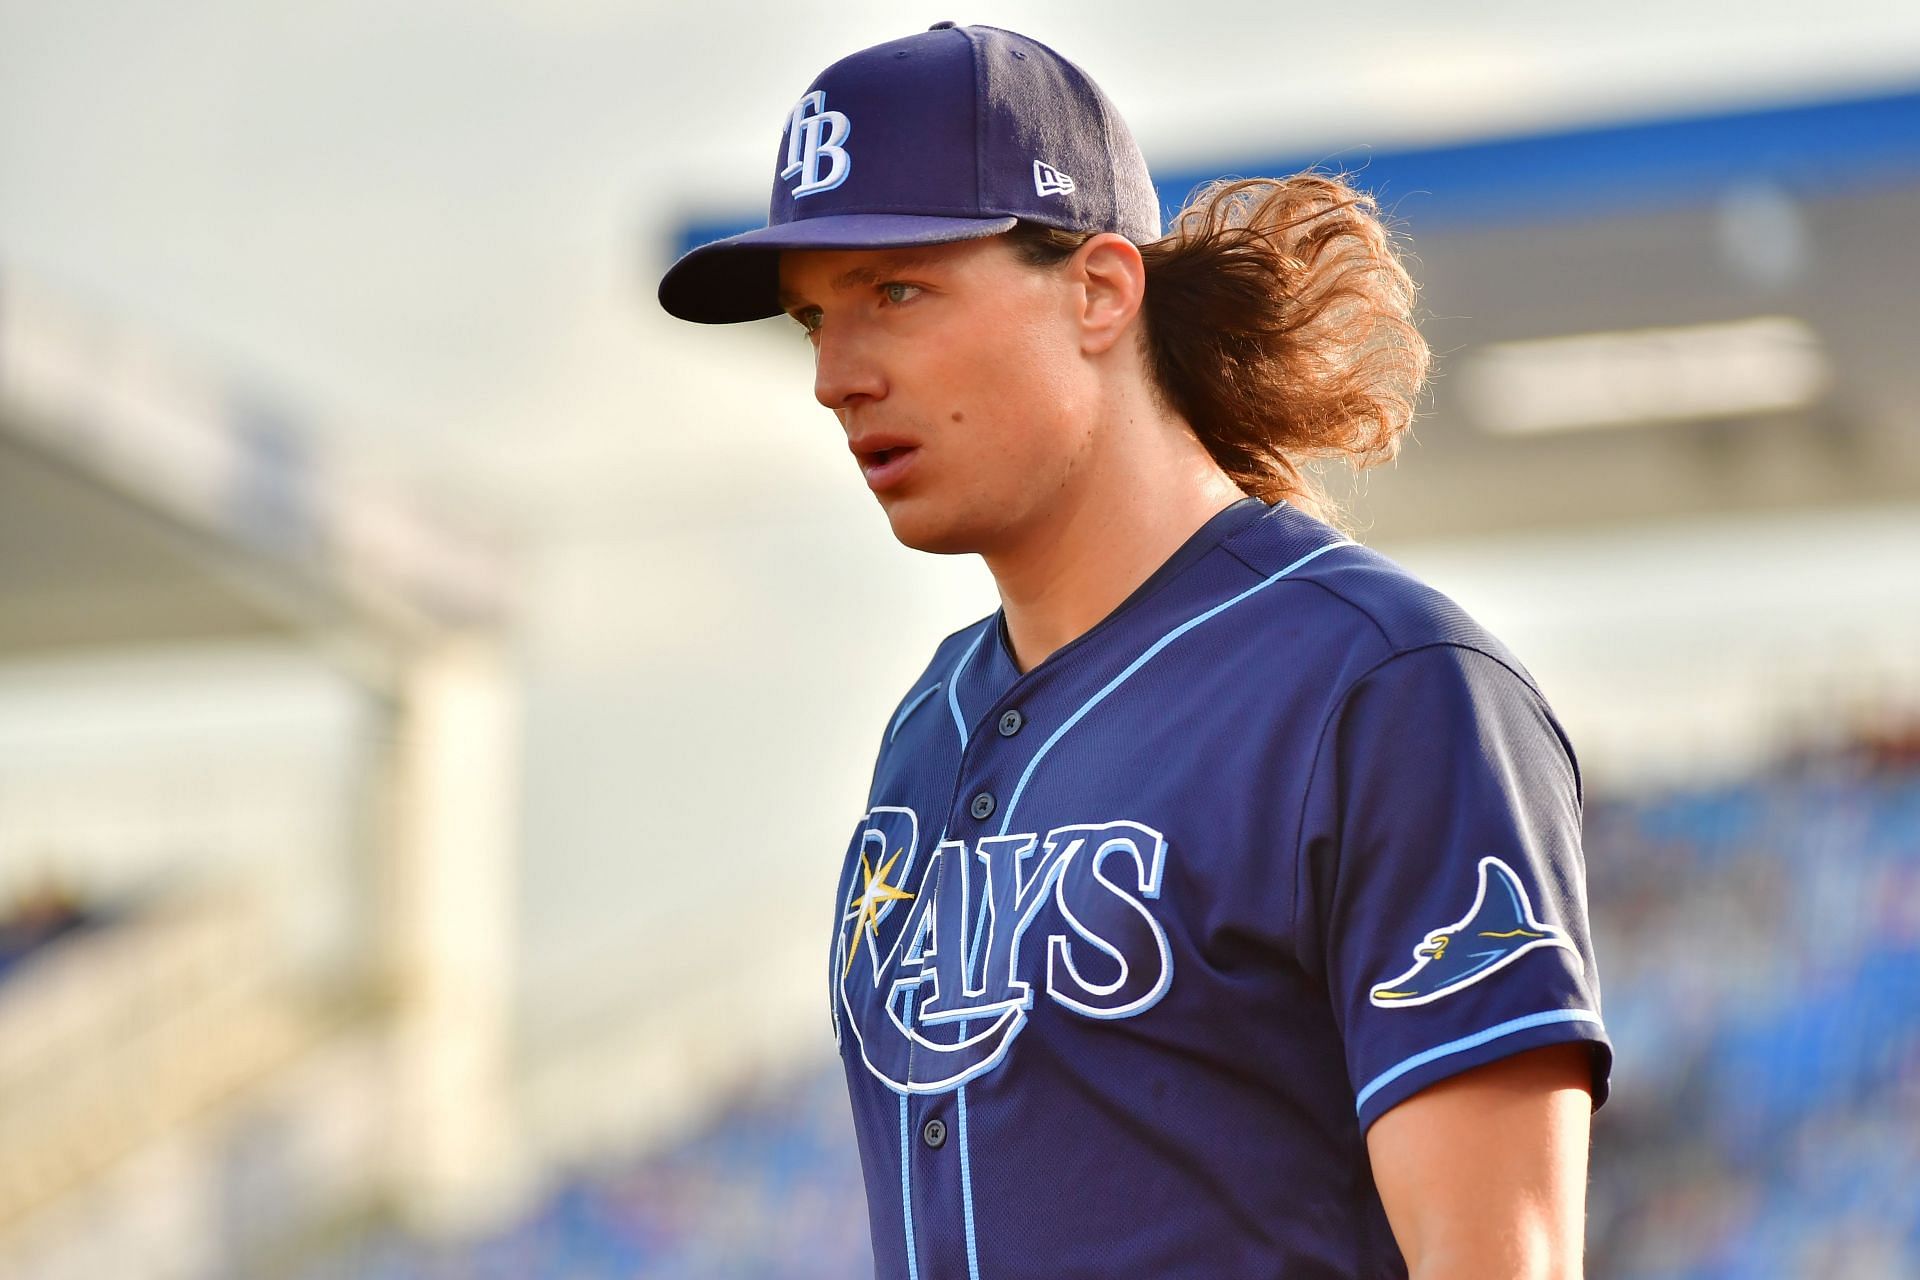 MLB Twitter reacts to Tampa Bay Rays pitcher Tyler Glasnow